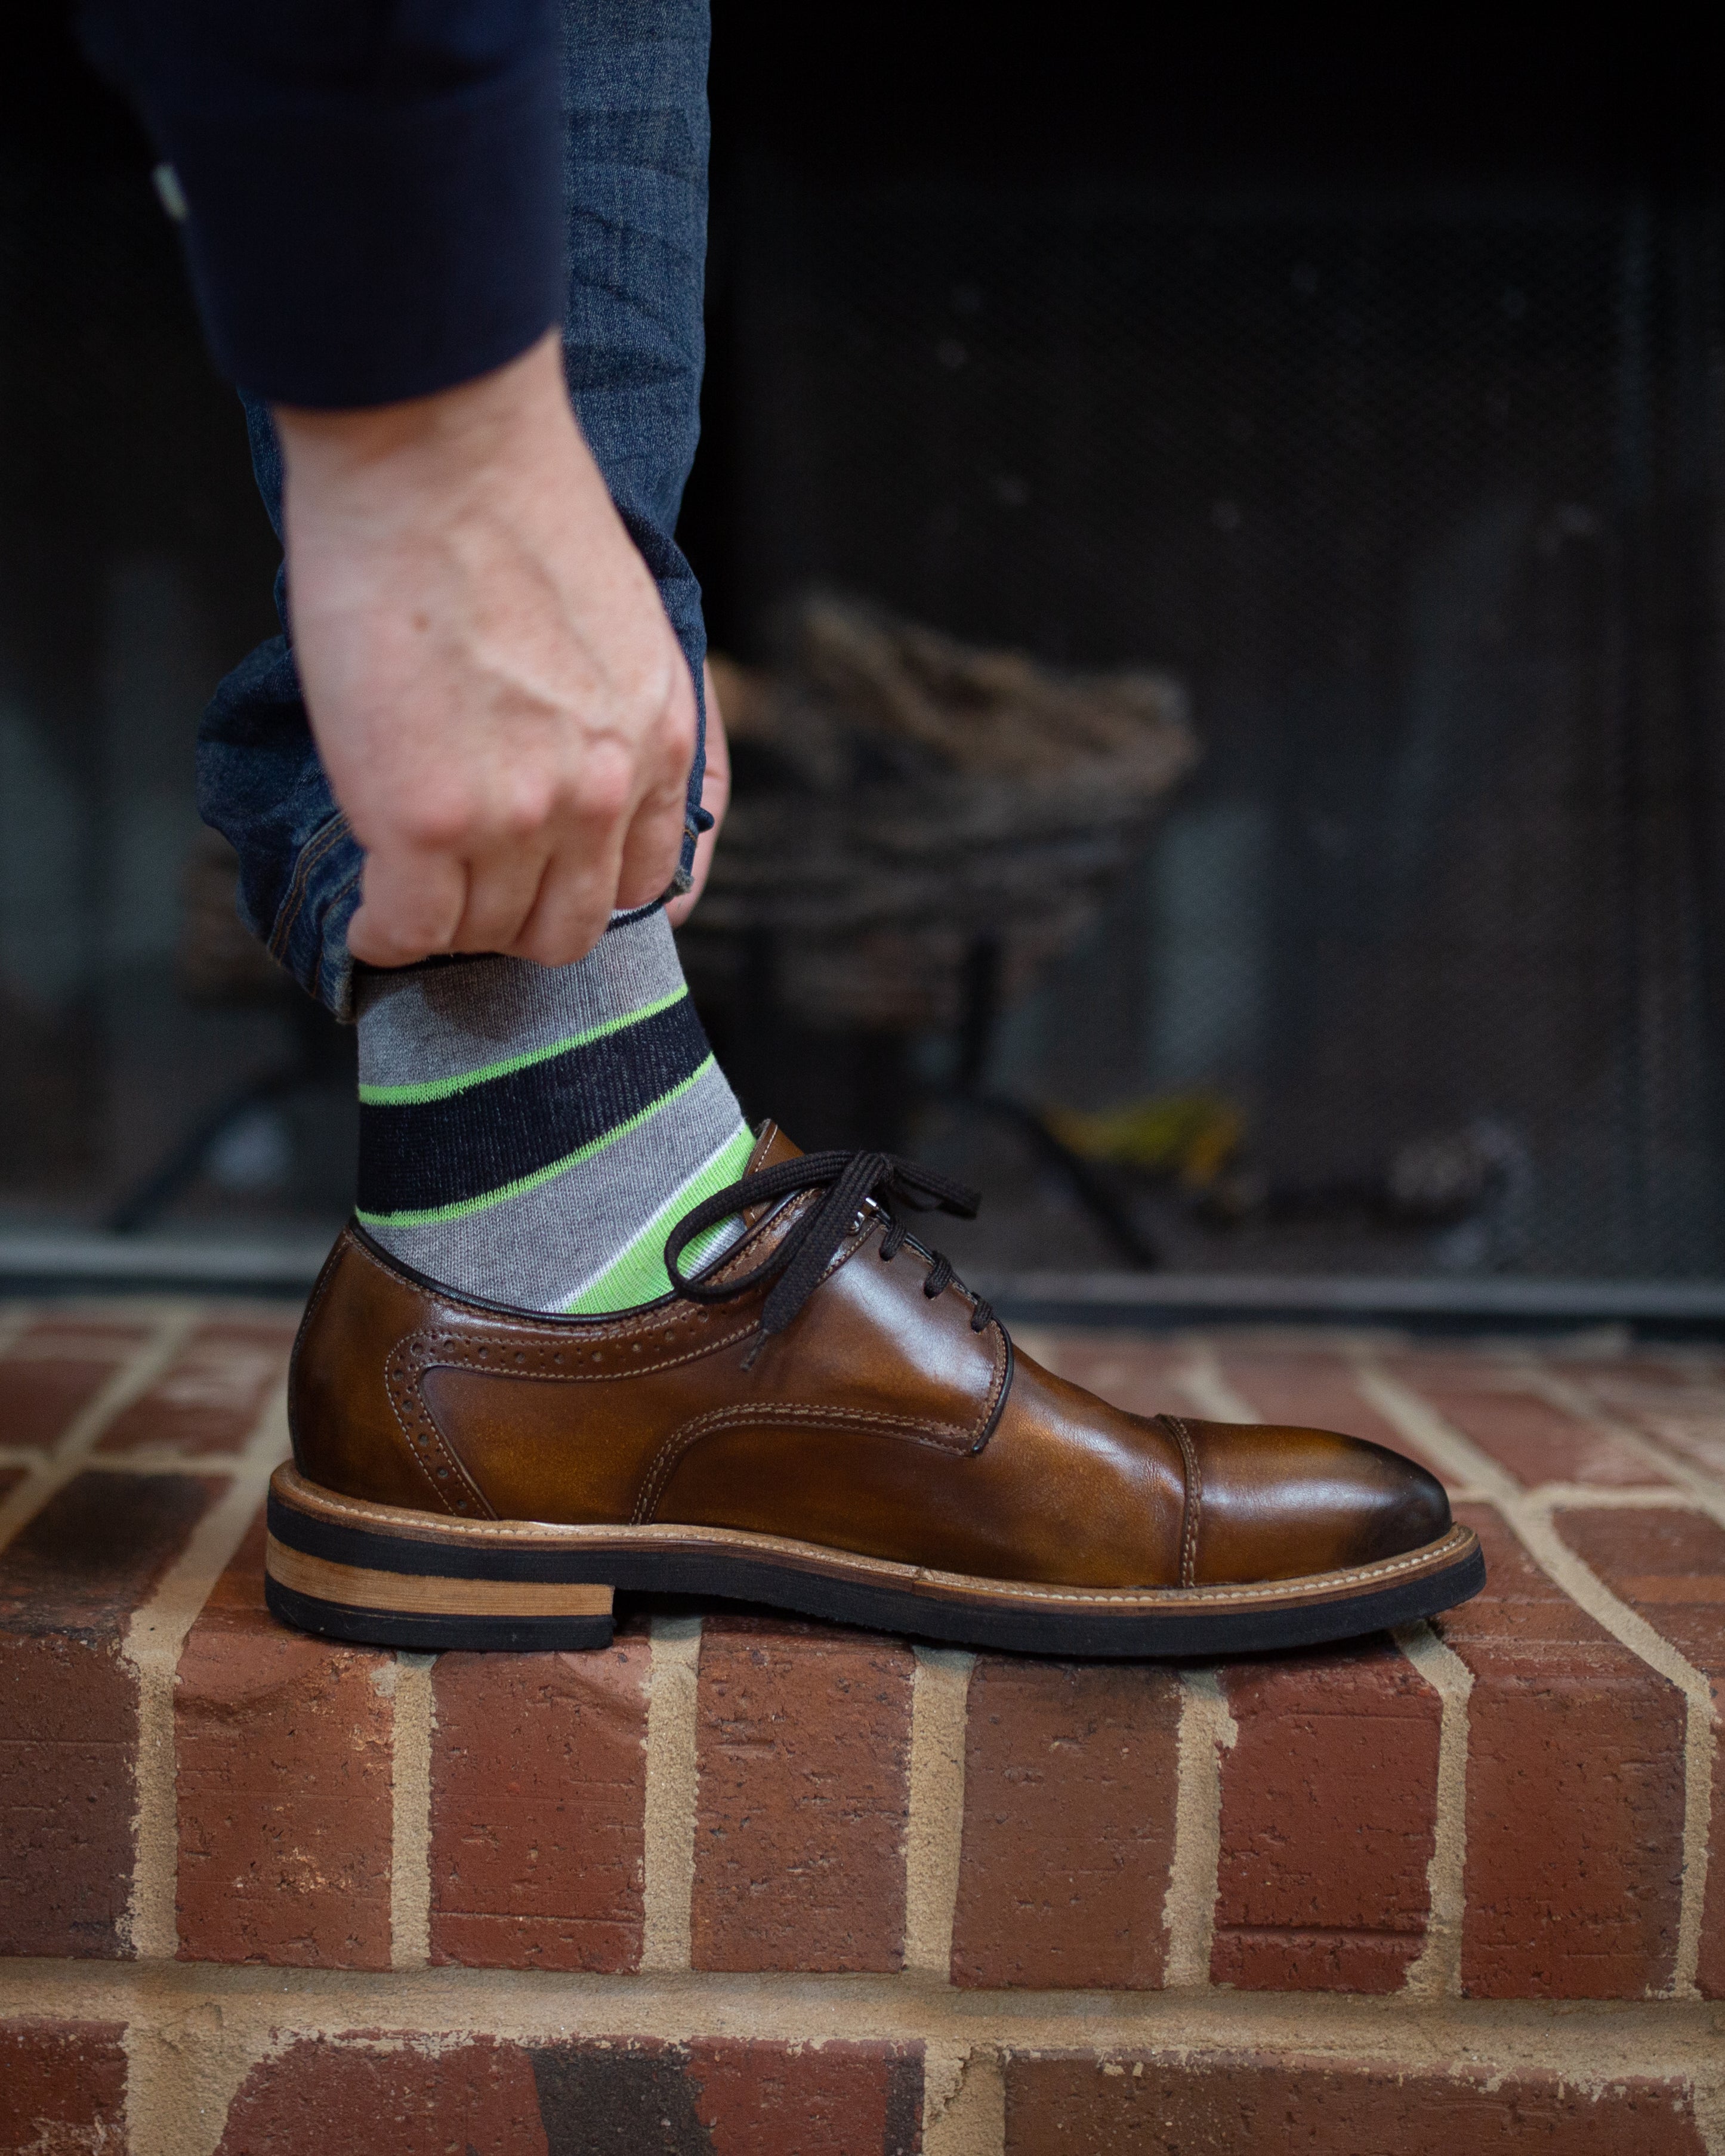 light grey over the calf dress socks with light green and black stripes, brown dress shoes, blue jeans